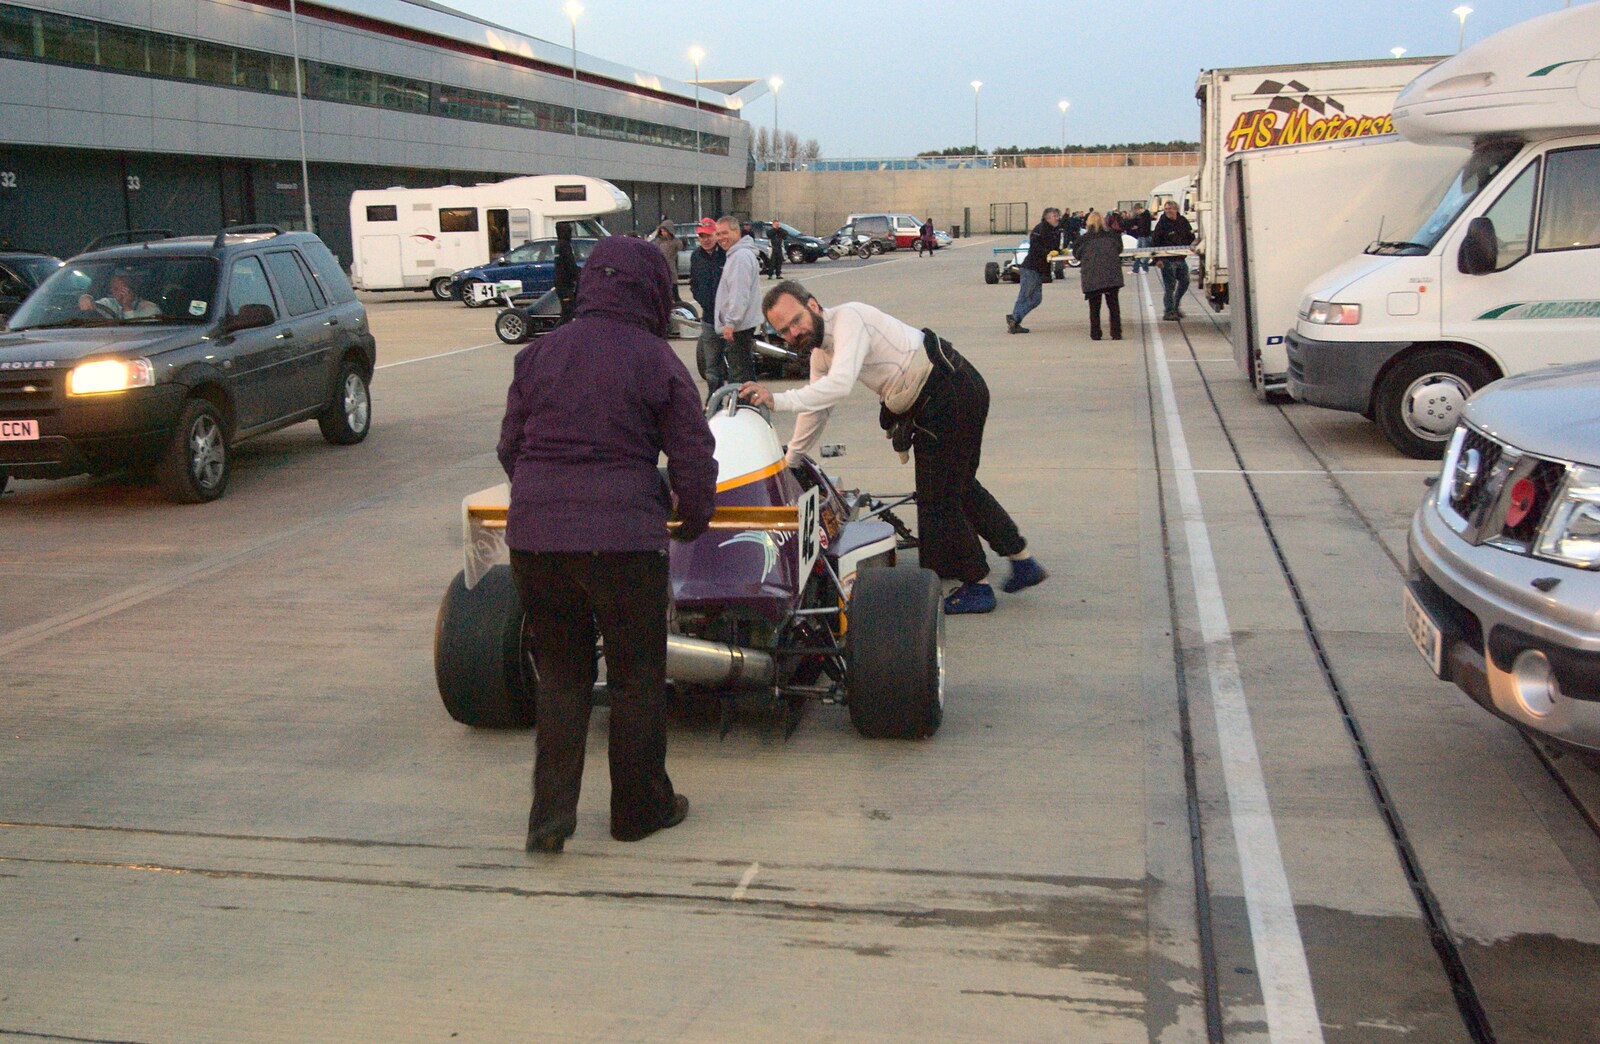 Paul's car is pushed off from TouchType at Silverstone, Northamptonshire - 22nd October 2011